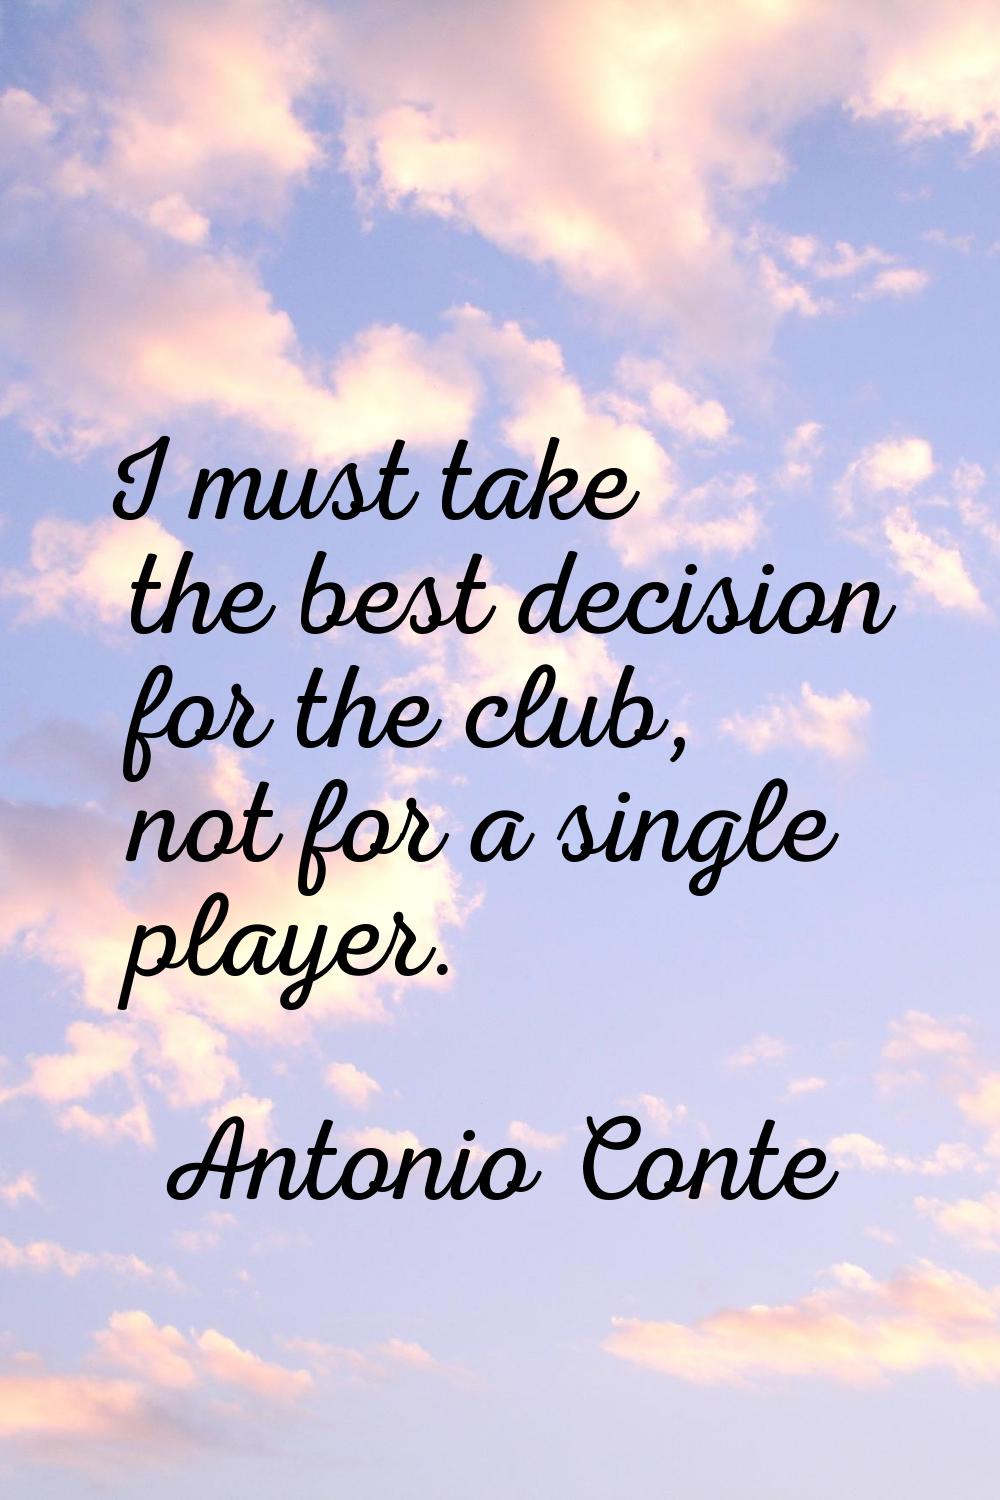 I must take the best decision for the club, not for a single player.